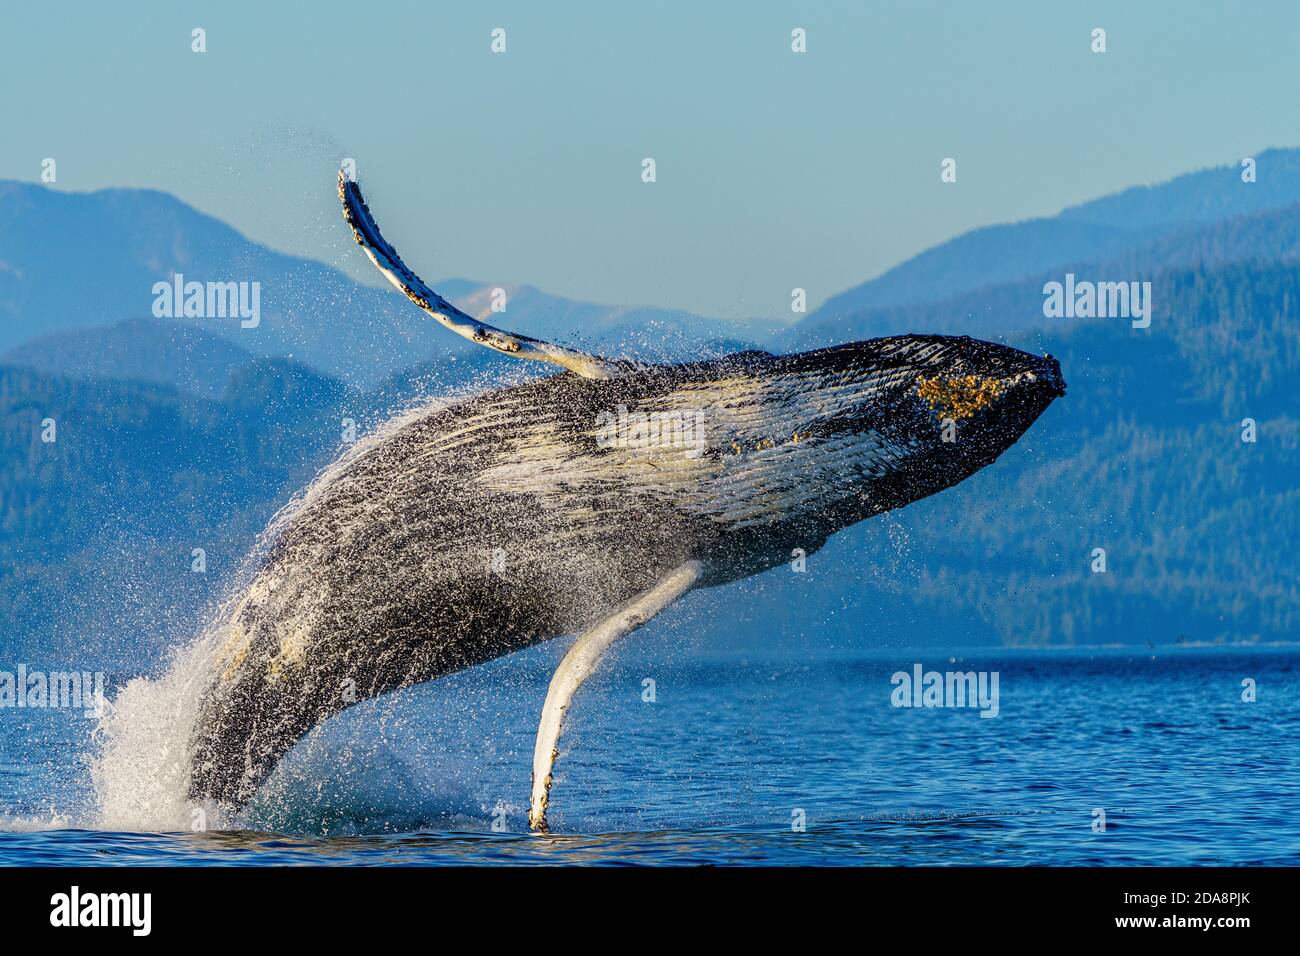 Humpback whale breaching in front of the scenic British Columbia Mountains Stock Photo